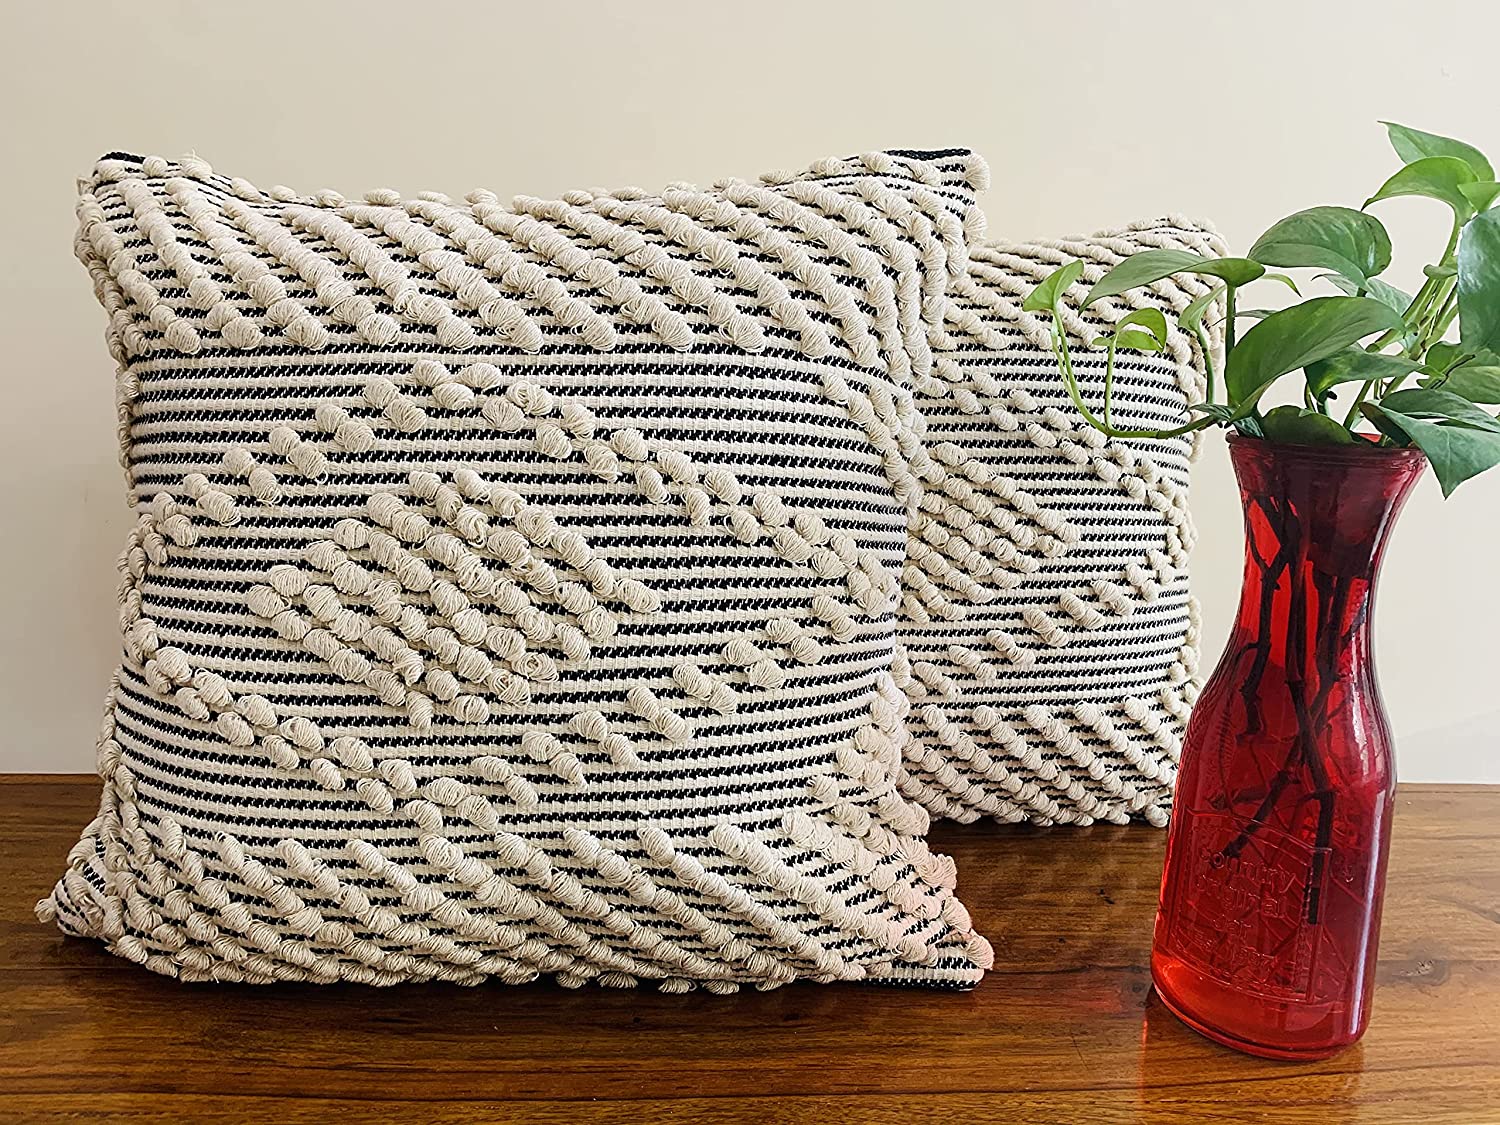 Water Hyacinth Woven Cushion (18 inches)